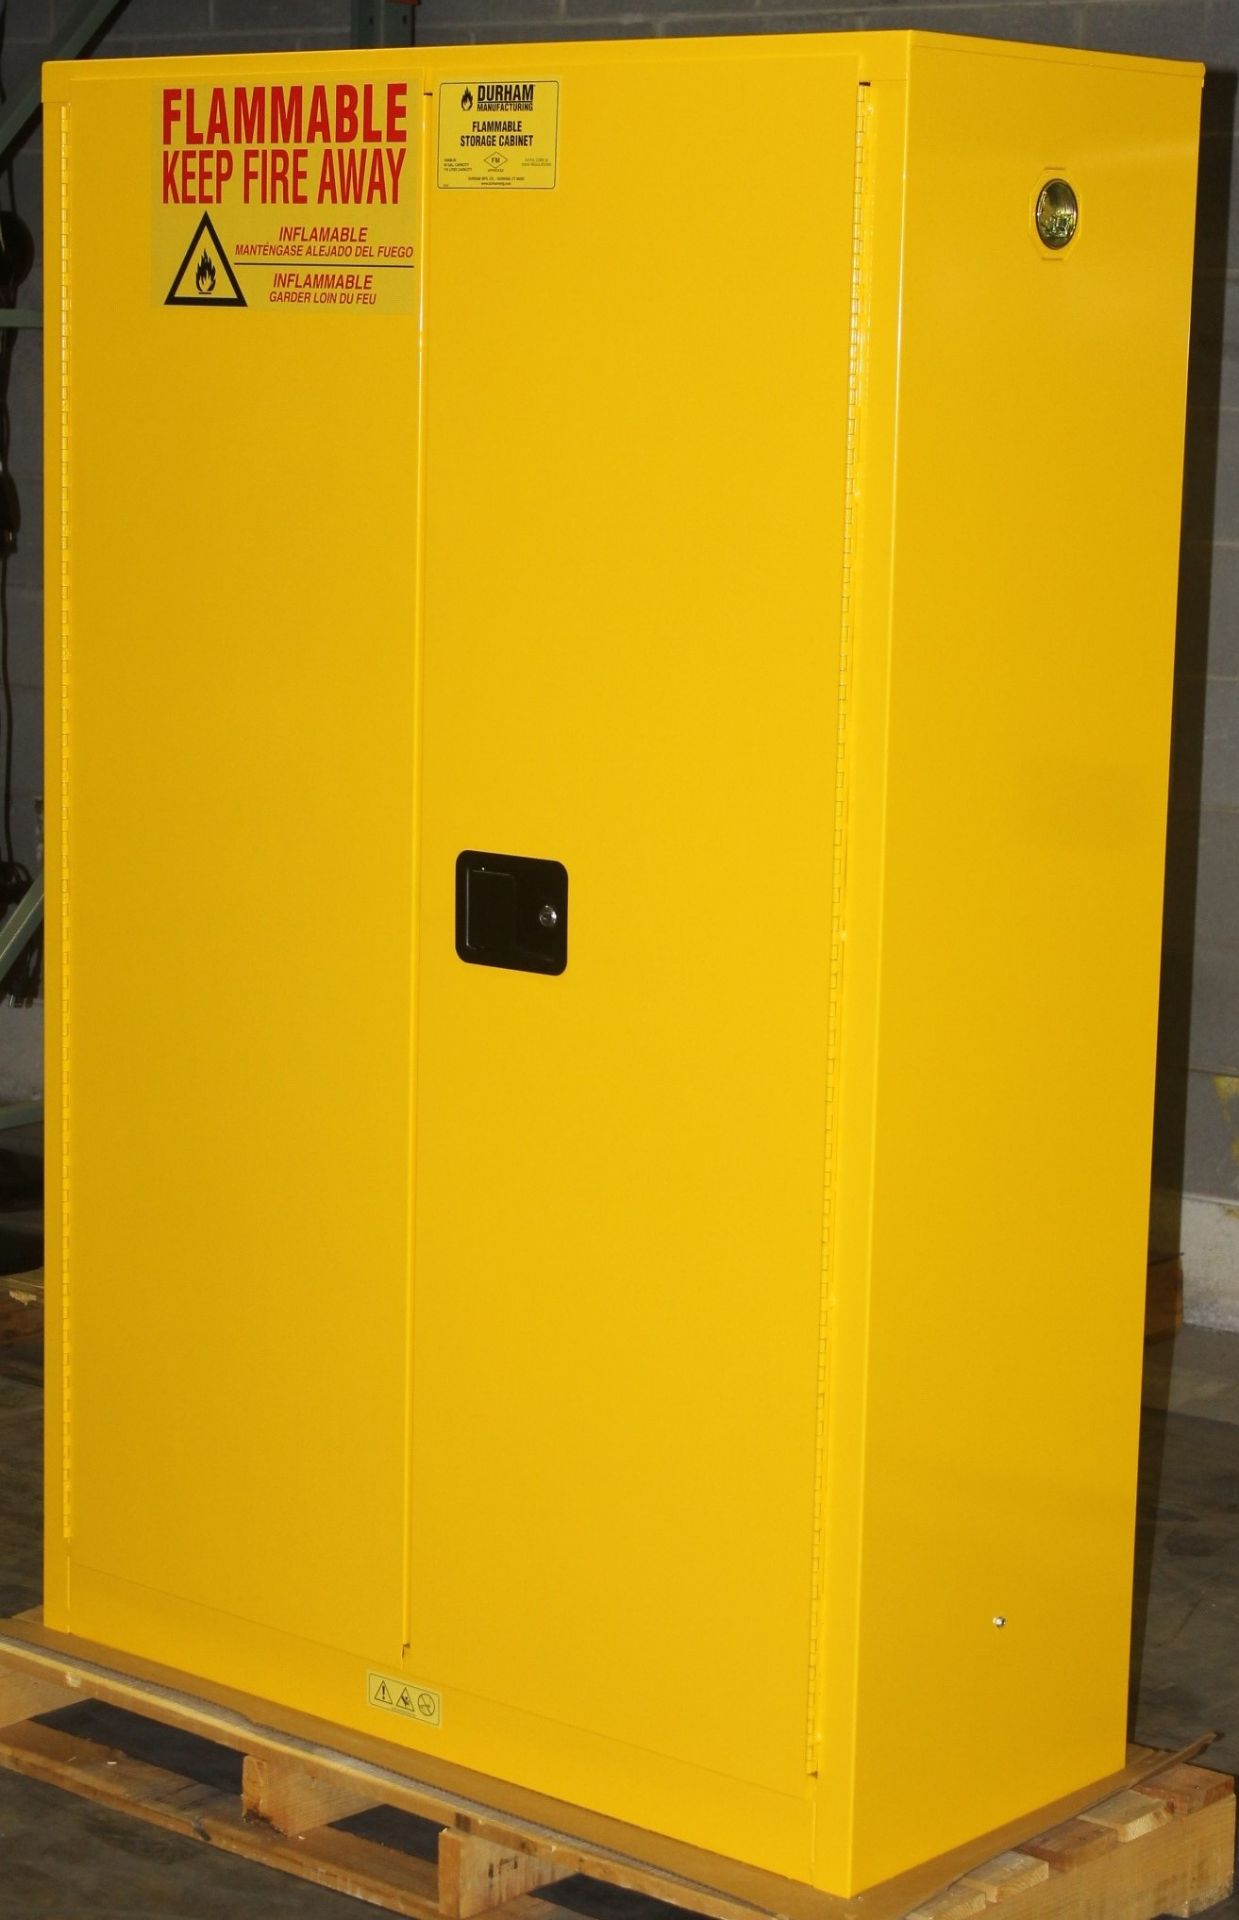 45 GALLONS FLAMMABLE SAFETY STORAGE CABINET - Image 4 of 4